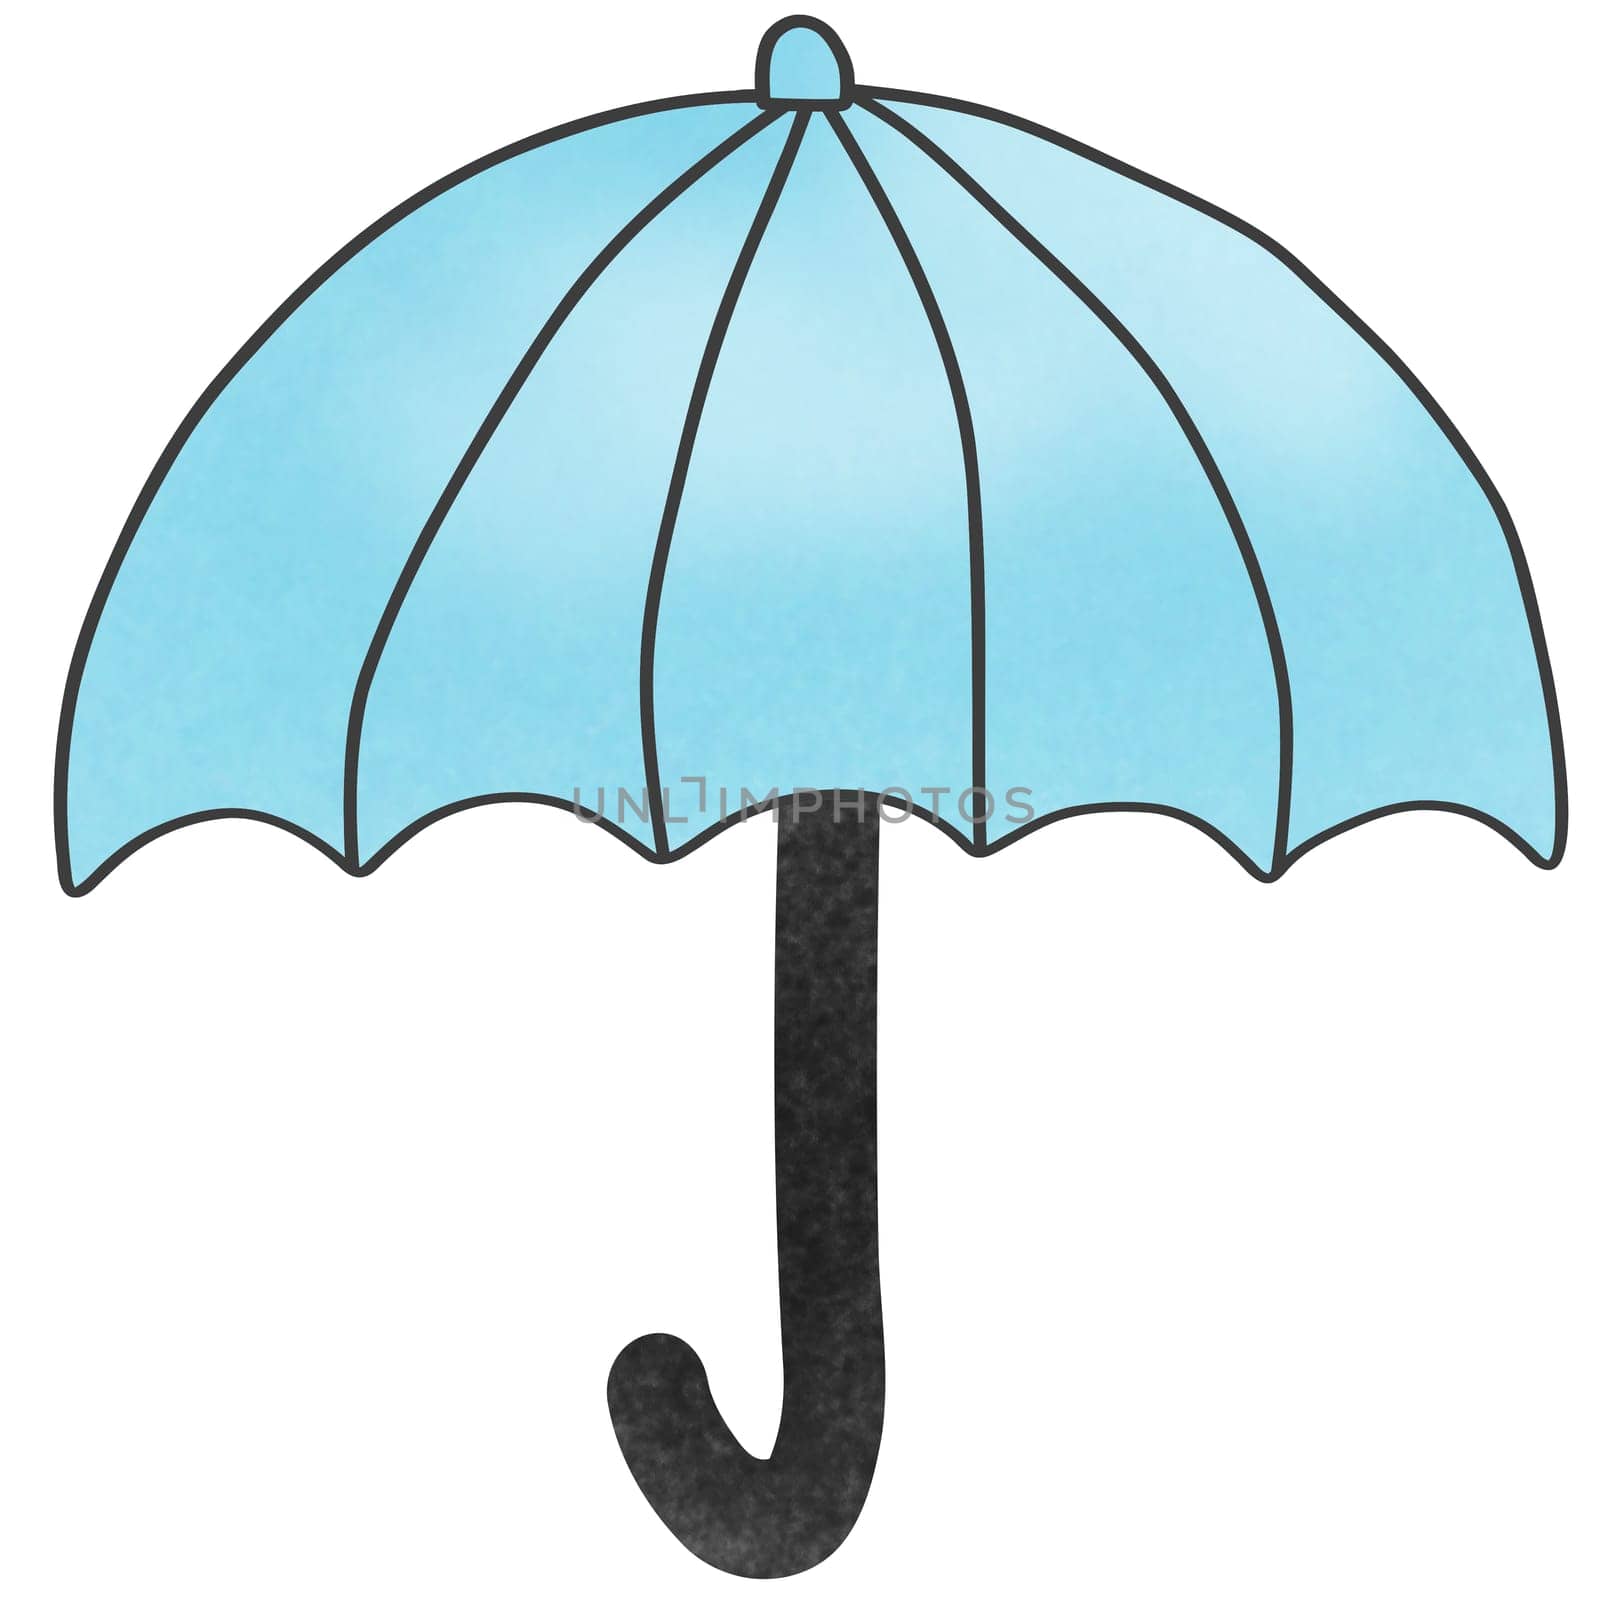 Drawing of blue umbrella isolated on white background for usage as an illustration concept by iamnoonmai